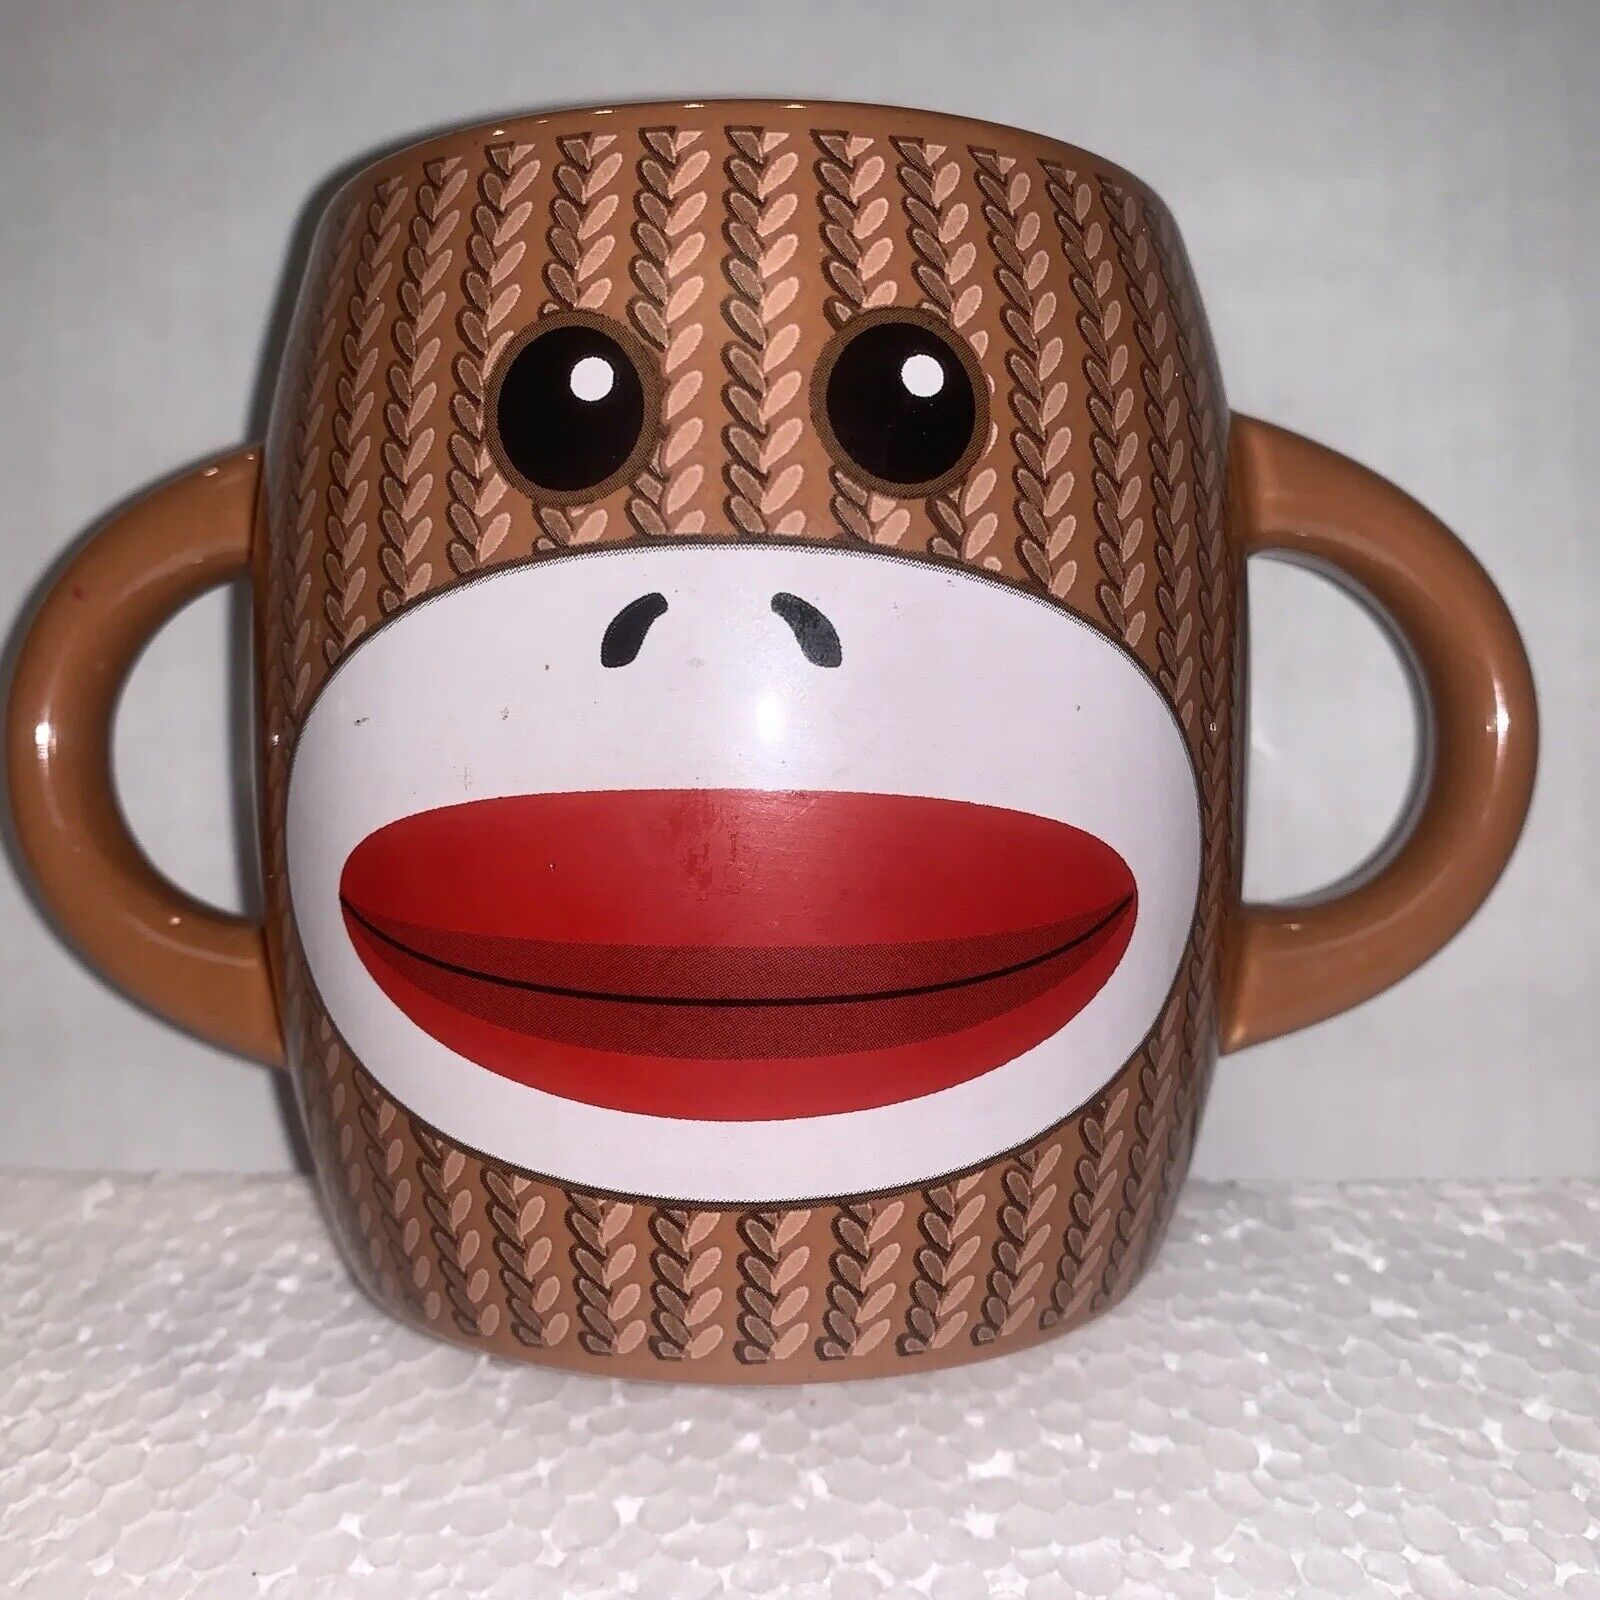 Coffee Mug  Monkey Double Handle Ceramic Cup Galerie Brown Striped